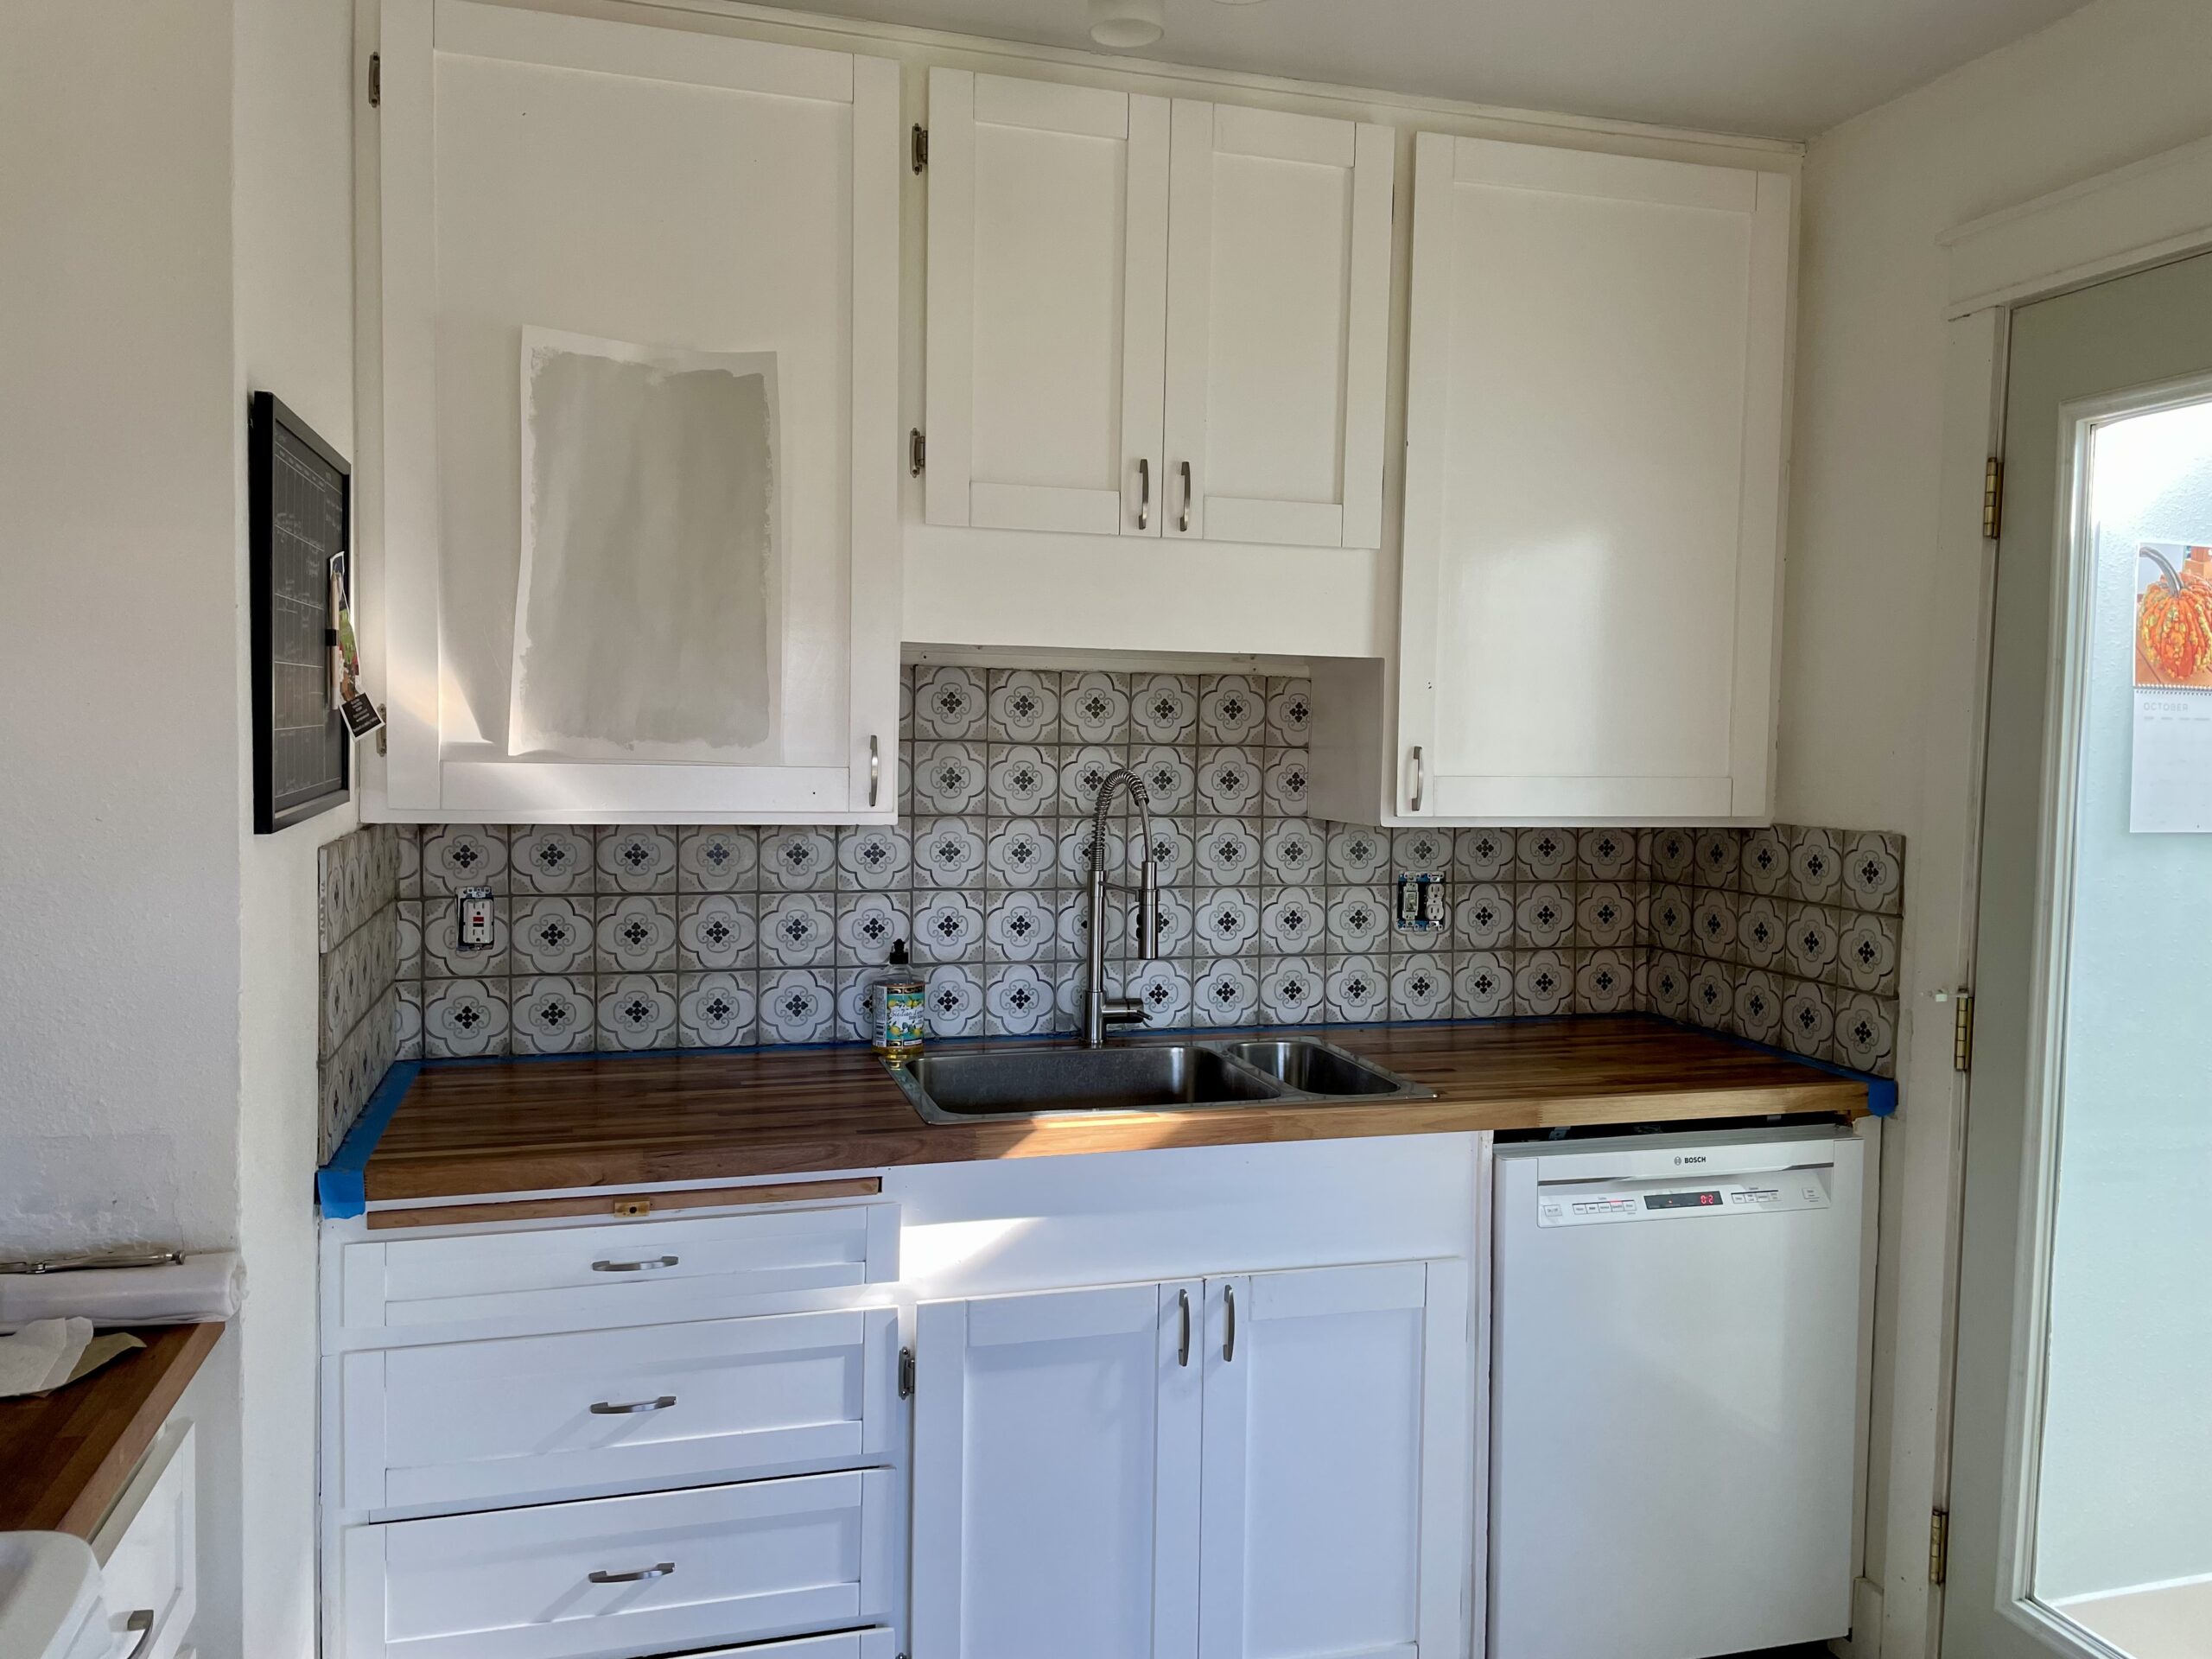 Same view of kitchen, with dark butcher-block counter tops and colorful tile backsplash that fills wall behind sink.